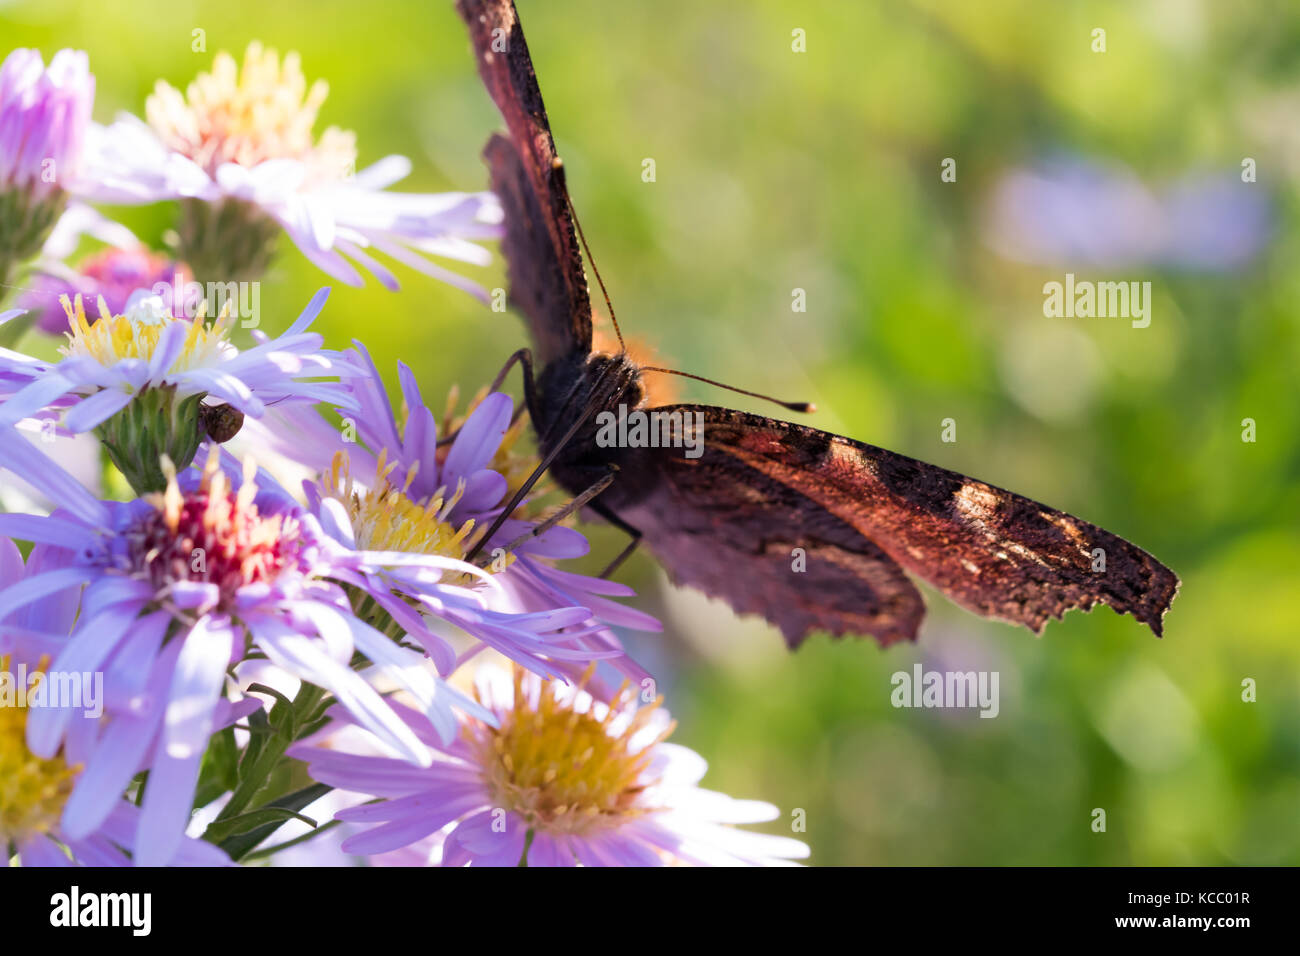 The peacock butterfly sitting on a flower (Aster amellus) and feeding on nectar. Also known as Aglais io, the European peacock. Close-up with selectiv Stock Photo